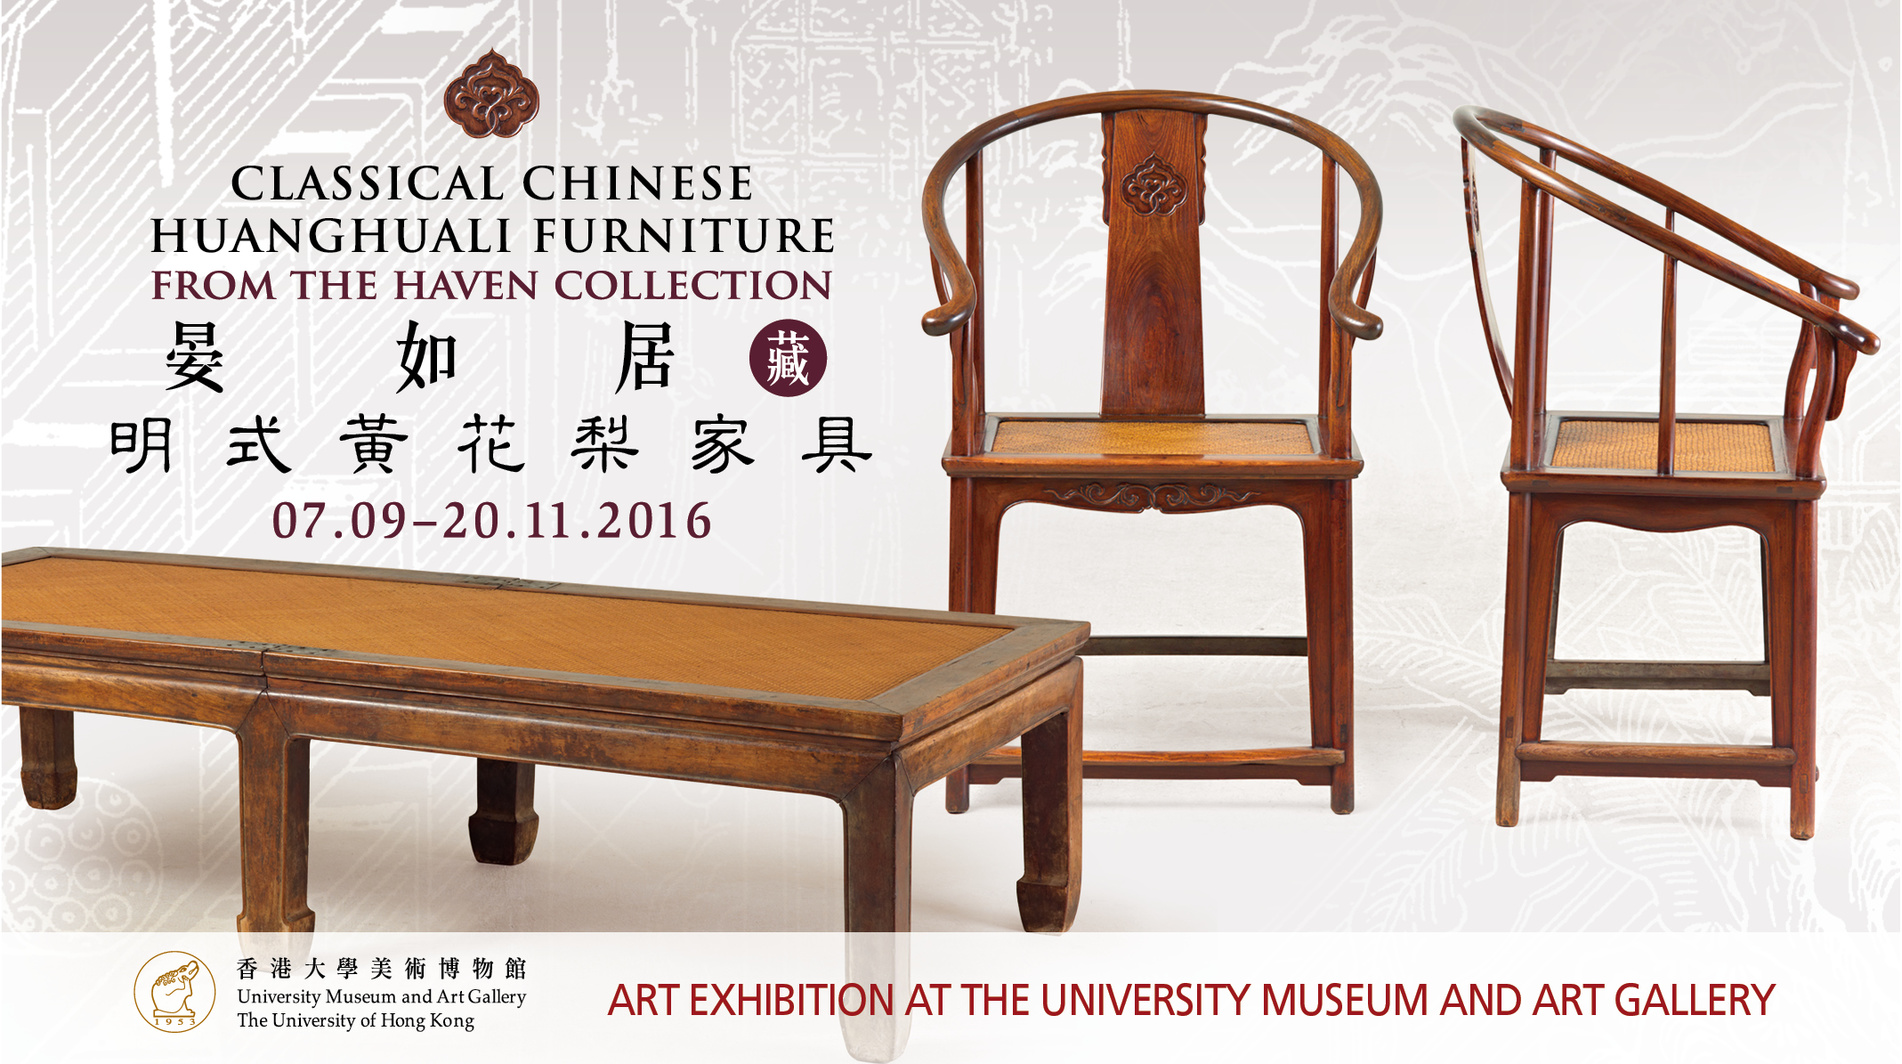 Classical Chinese Huanghuali Furniture from the Haven Collection 《晏如居藏明式黃花梨家具》 